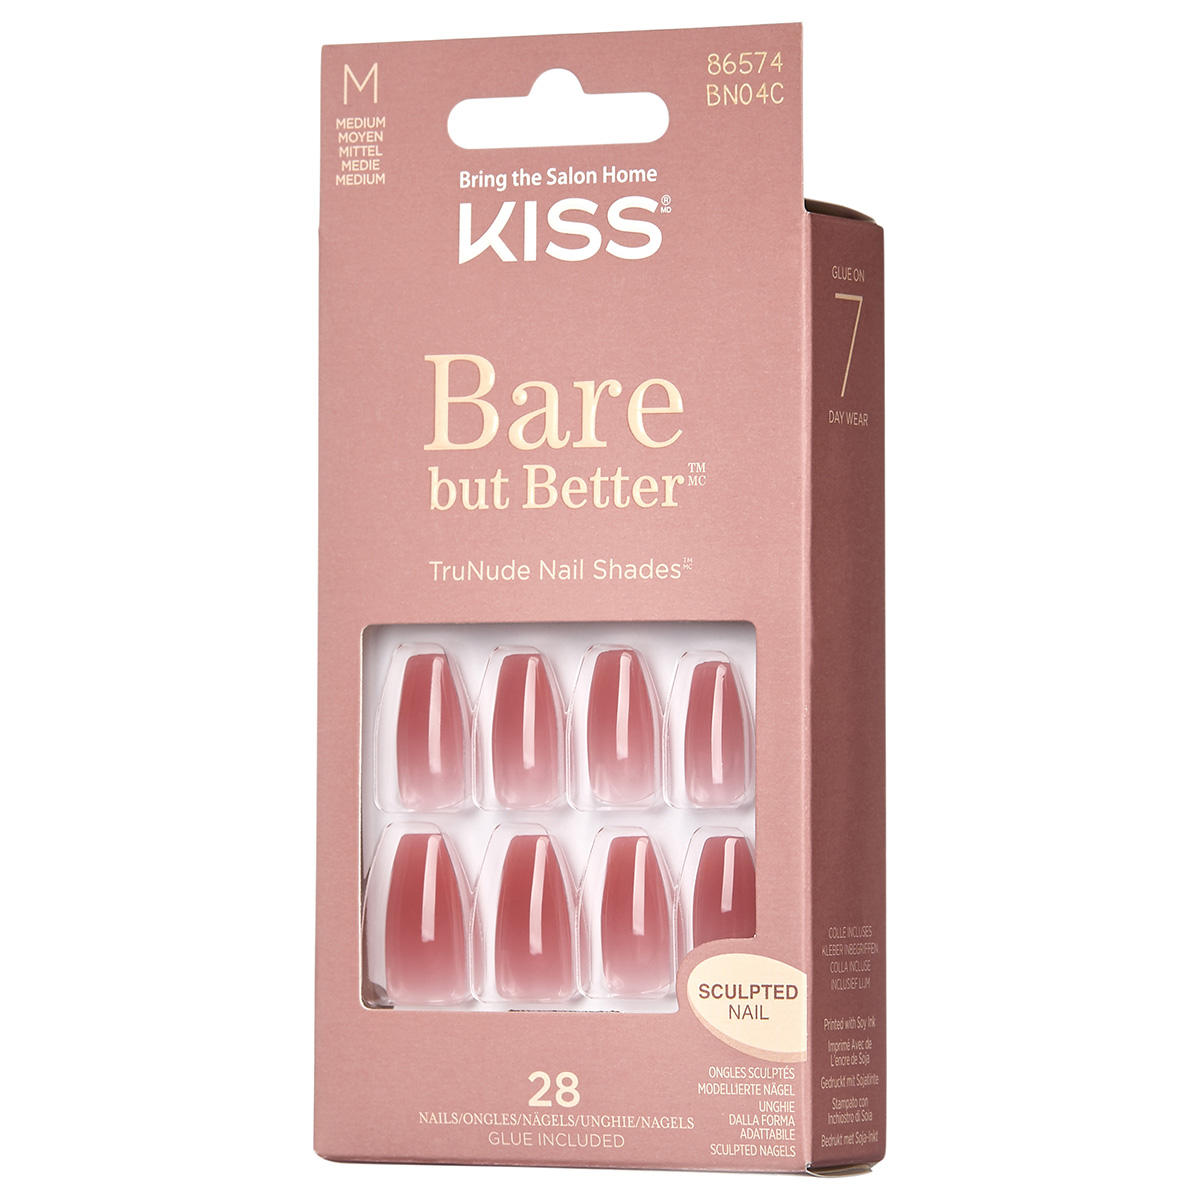 KISS Bare but Better Nails - Nude Nude  - 7